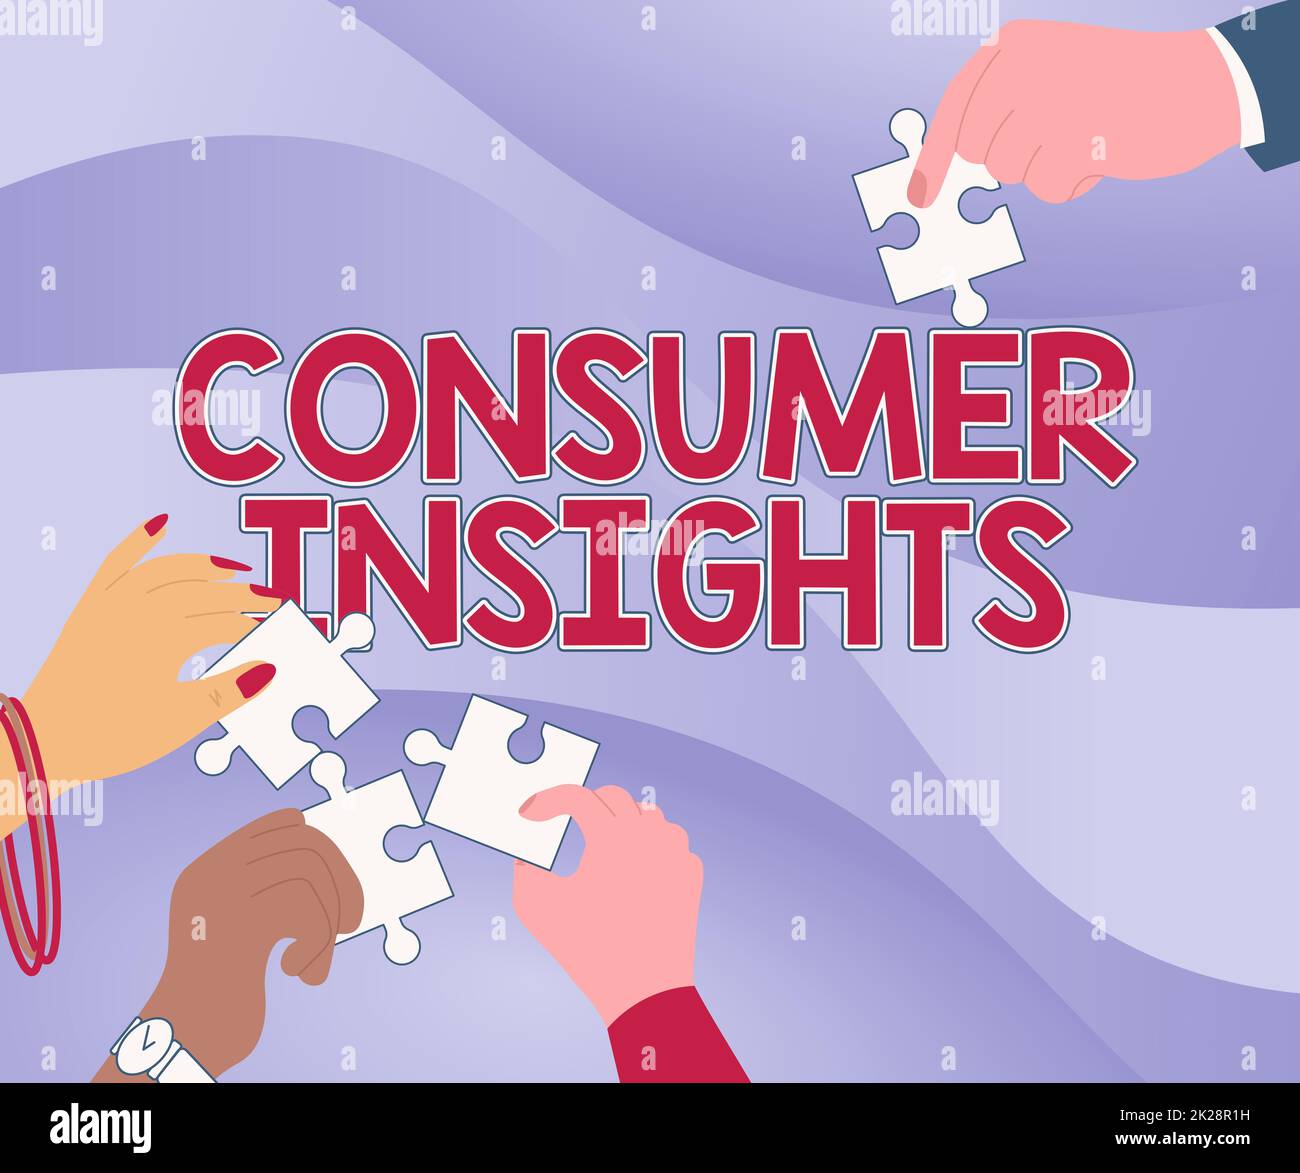 Handwriting text Consumer Insights. Internet Concept understanding customers based on their buying behavior Illustration Of Hands Holding Jigsaw Puzzle Pieces Helping Each Others. Stock Photo